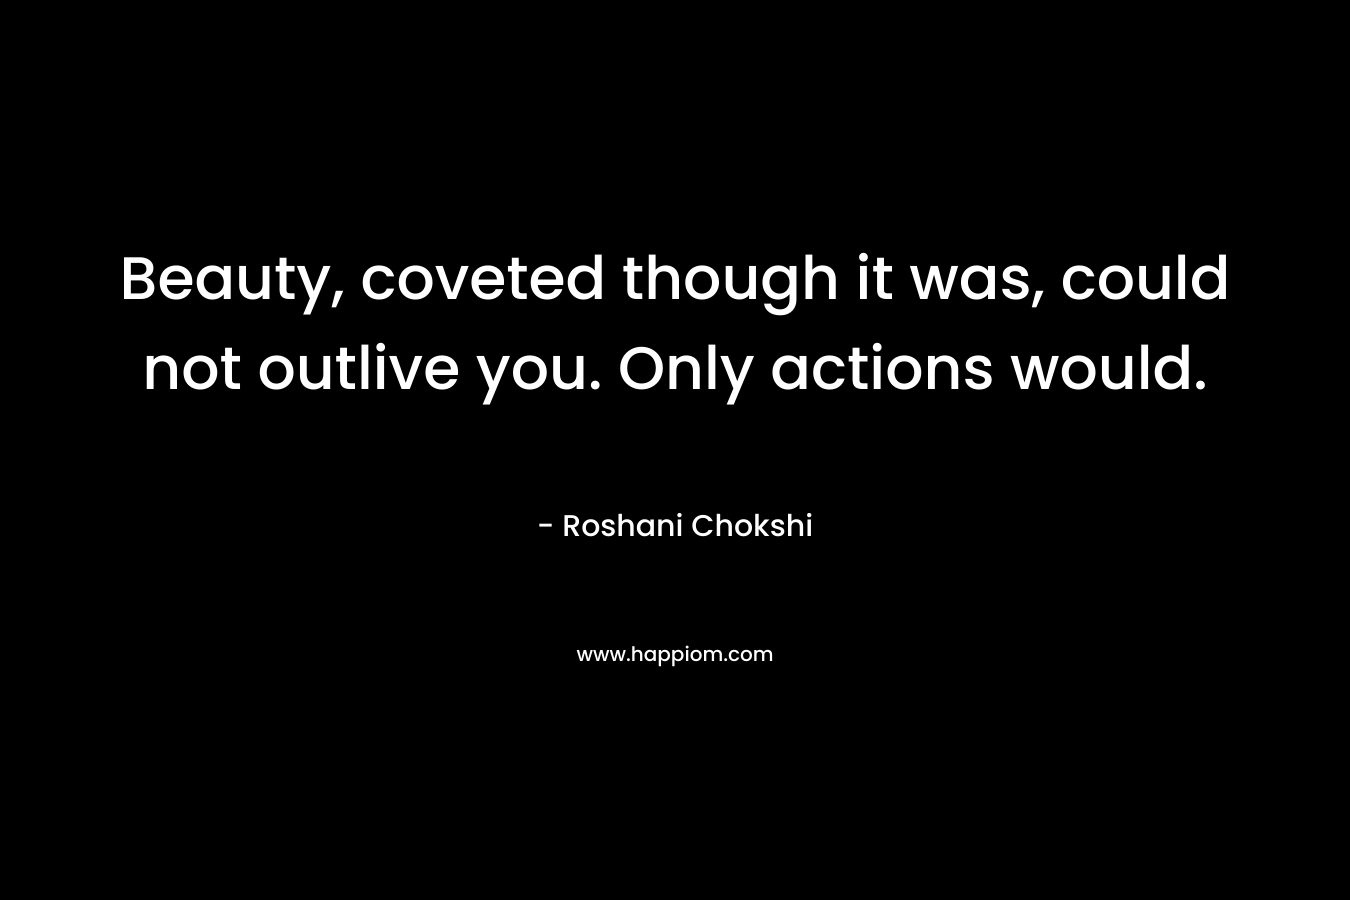 Beauty, coveted though it was, could not outlive you. Only actions would. – Roshani Chokshi